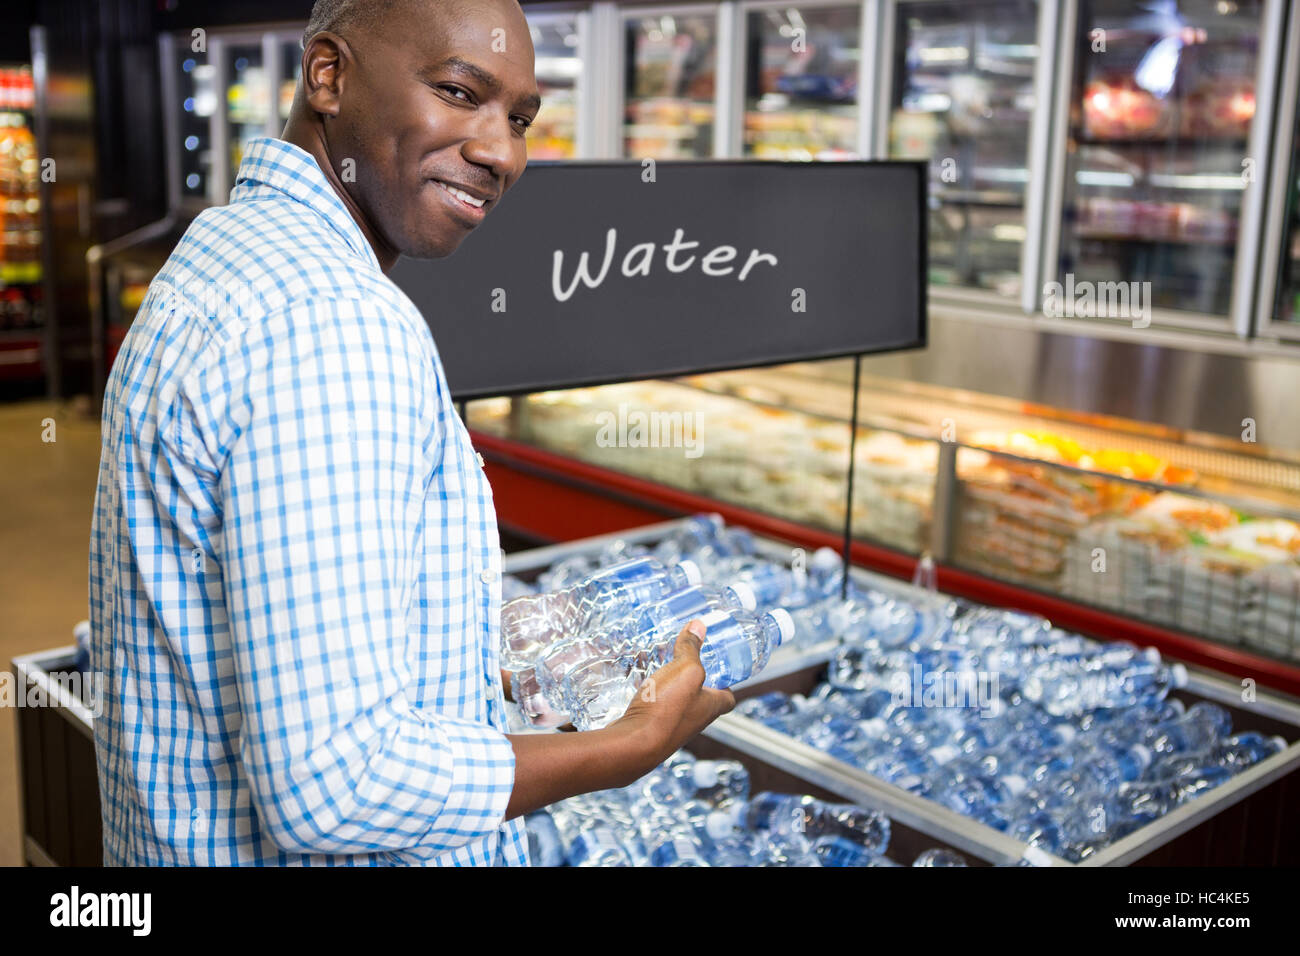 Man looking at bottle of water in supermarket Stock Photo